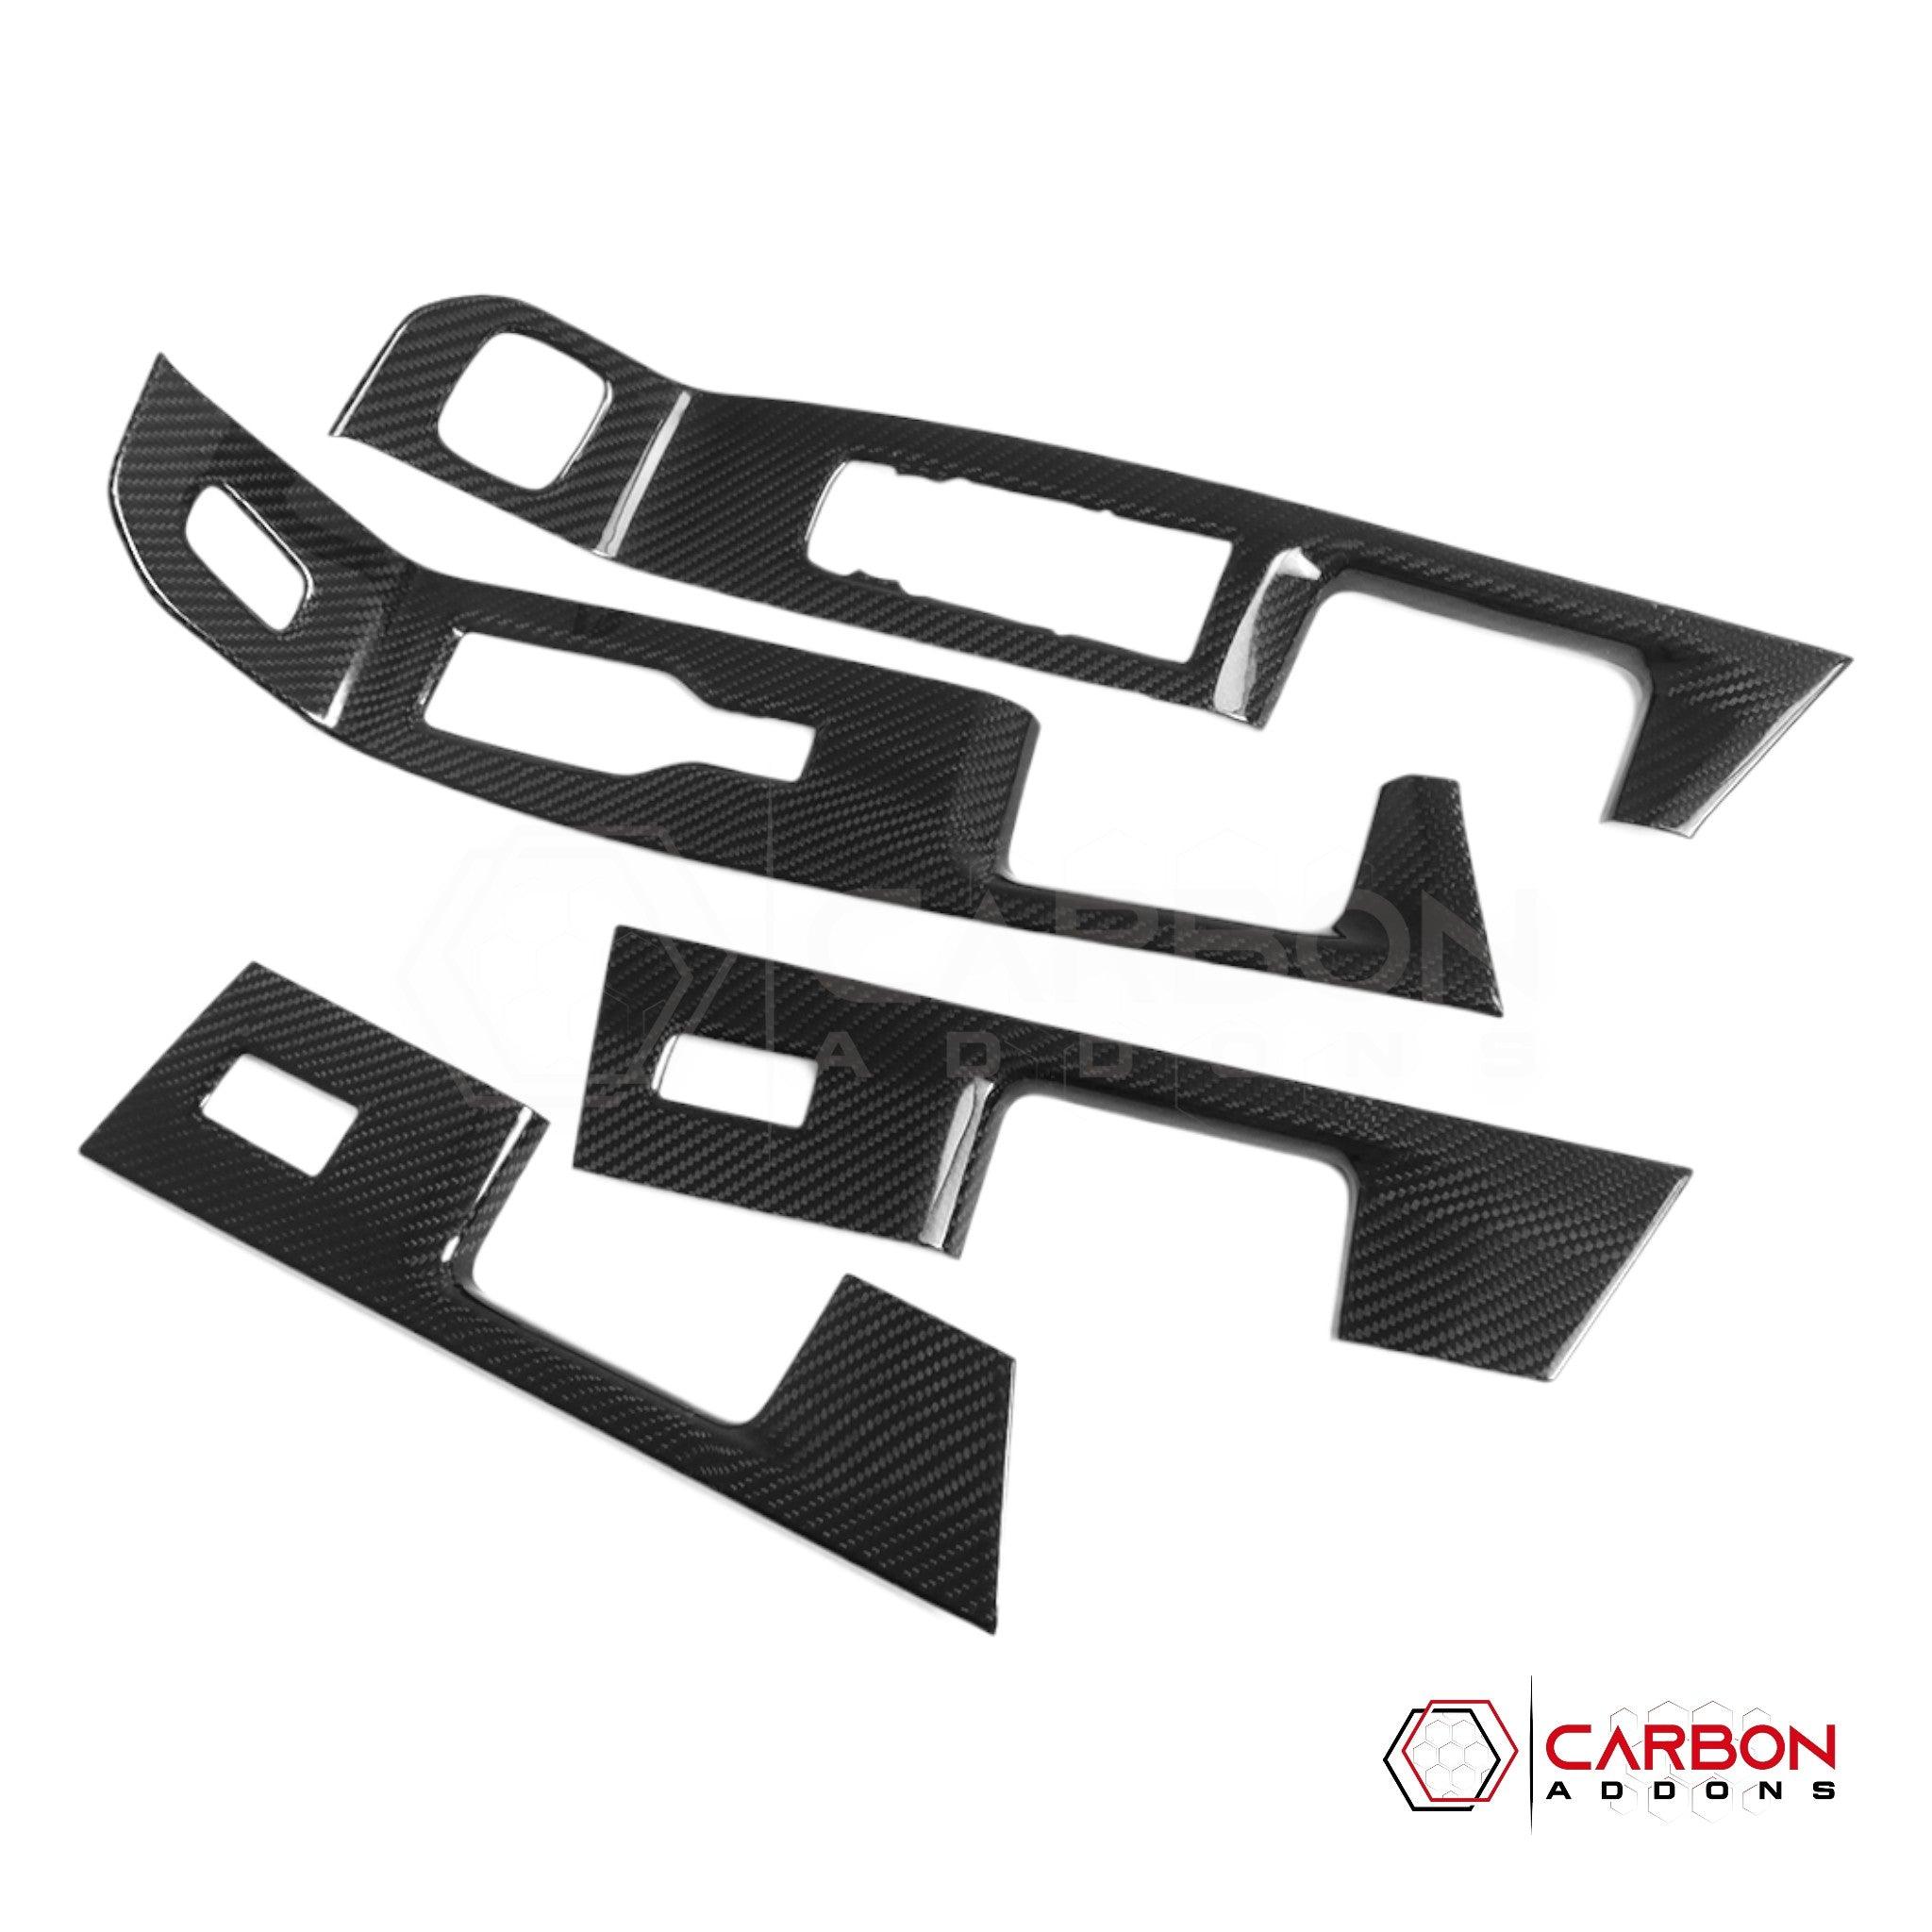 [Coming Soon] Ford F150 2021-Up Window Switch Trim Hard Carbon Fiber Cover - carbonaddons Carbon Fiber Parts, Accessories, Upgrades, Mods